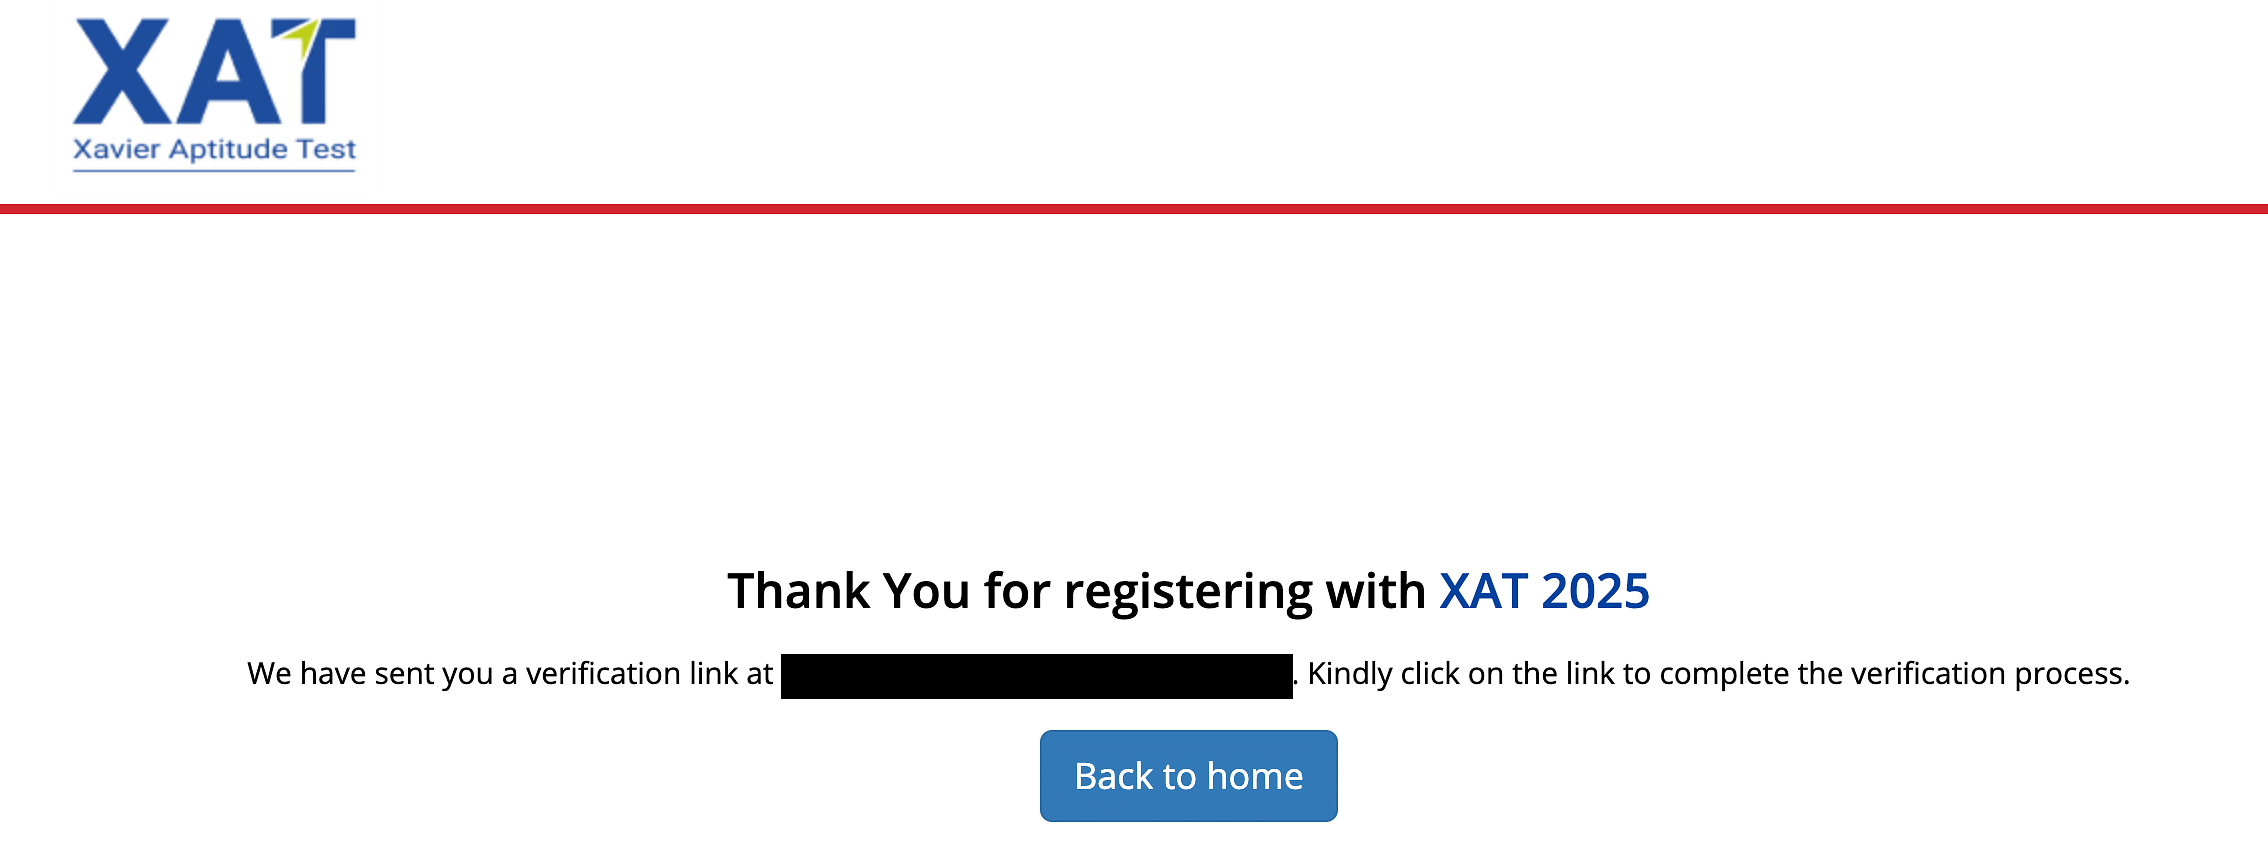 XAT 2025 Email Verification